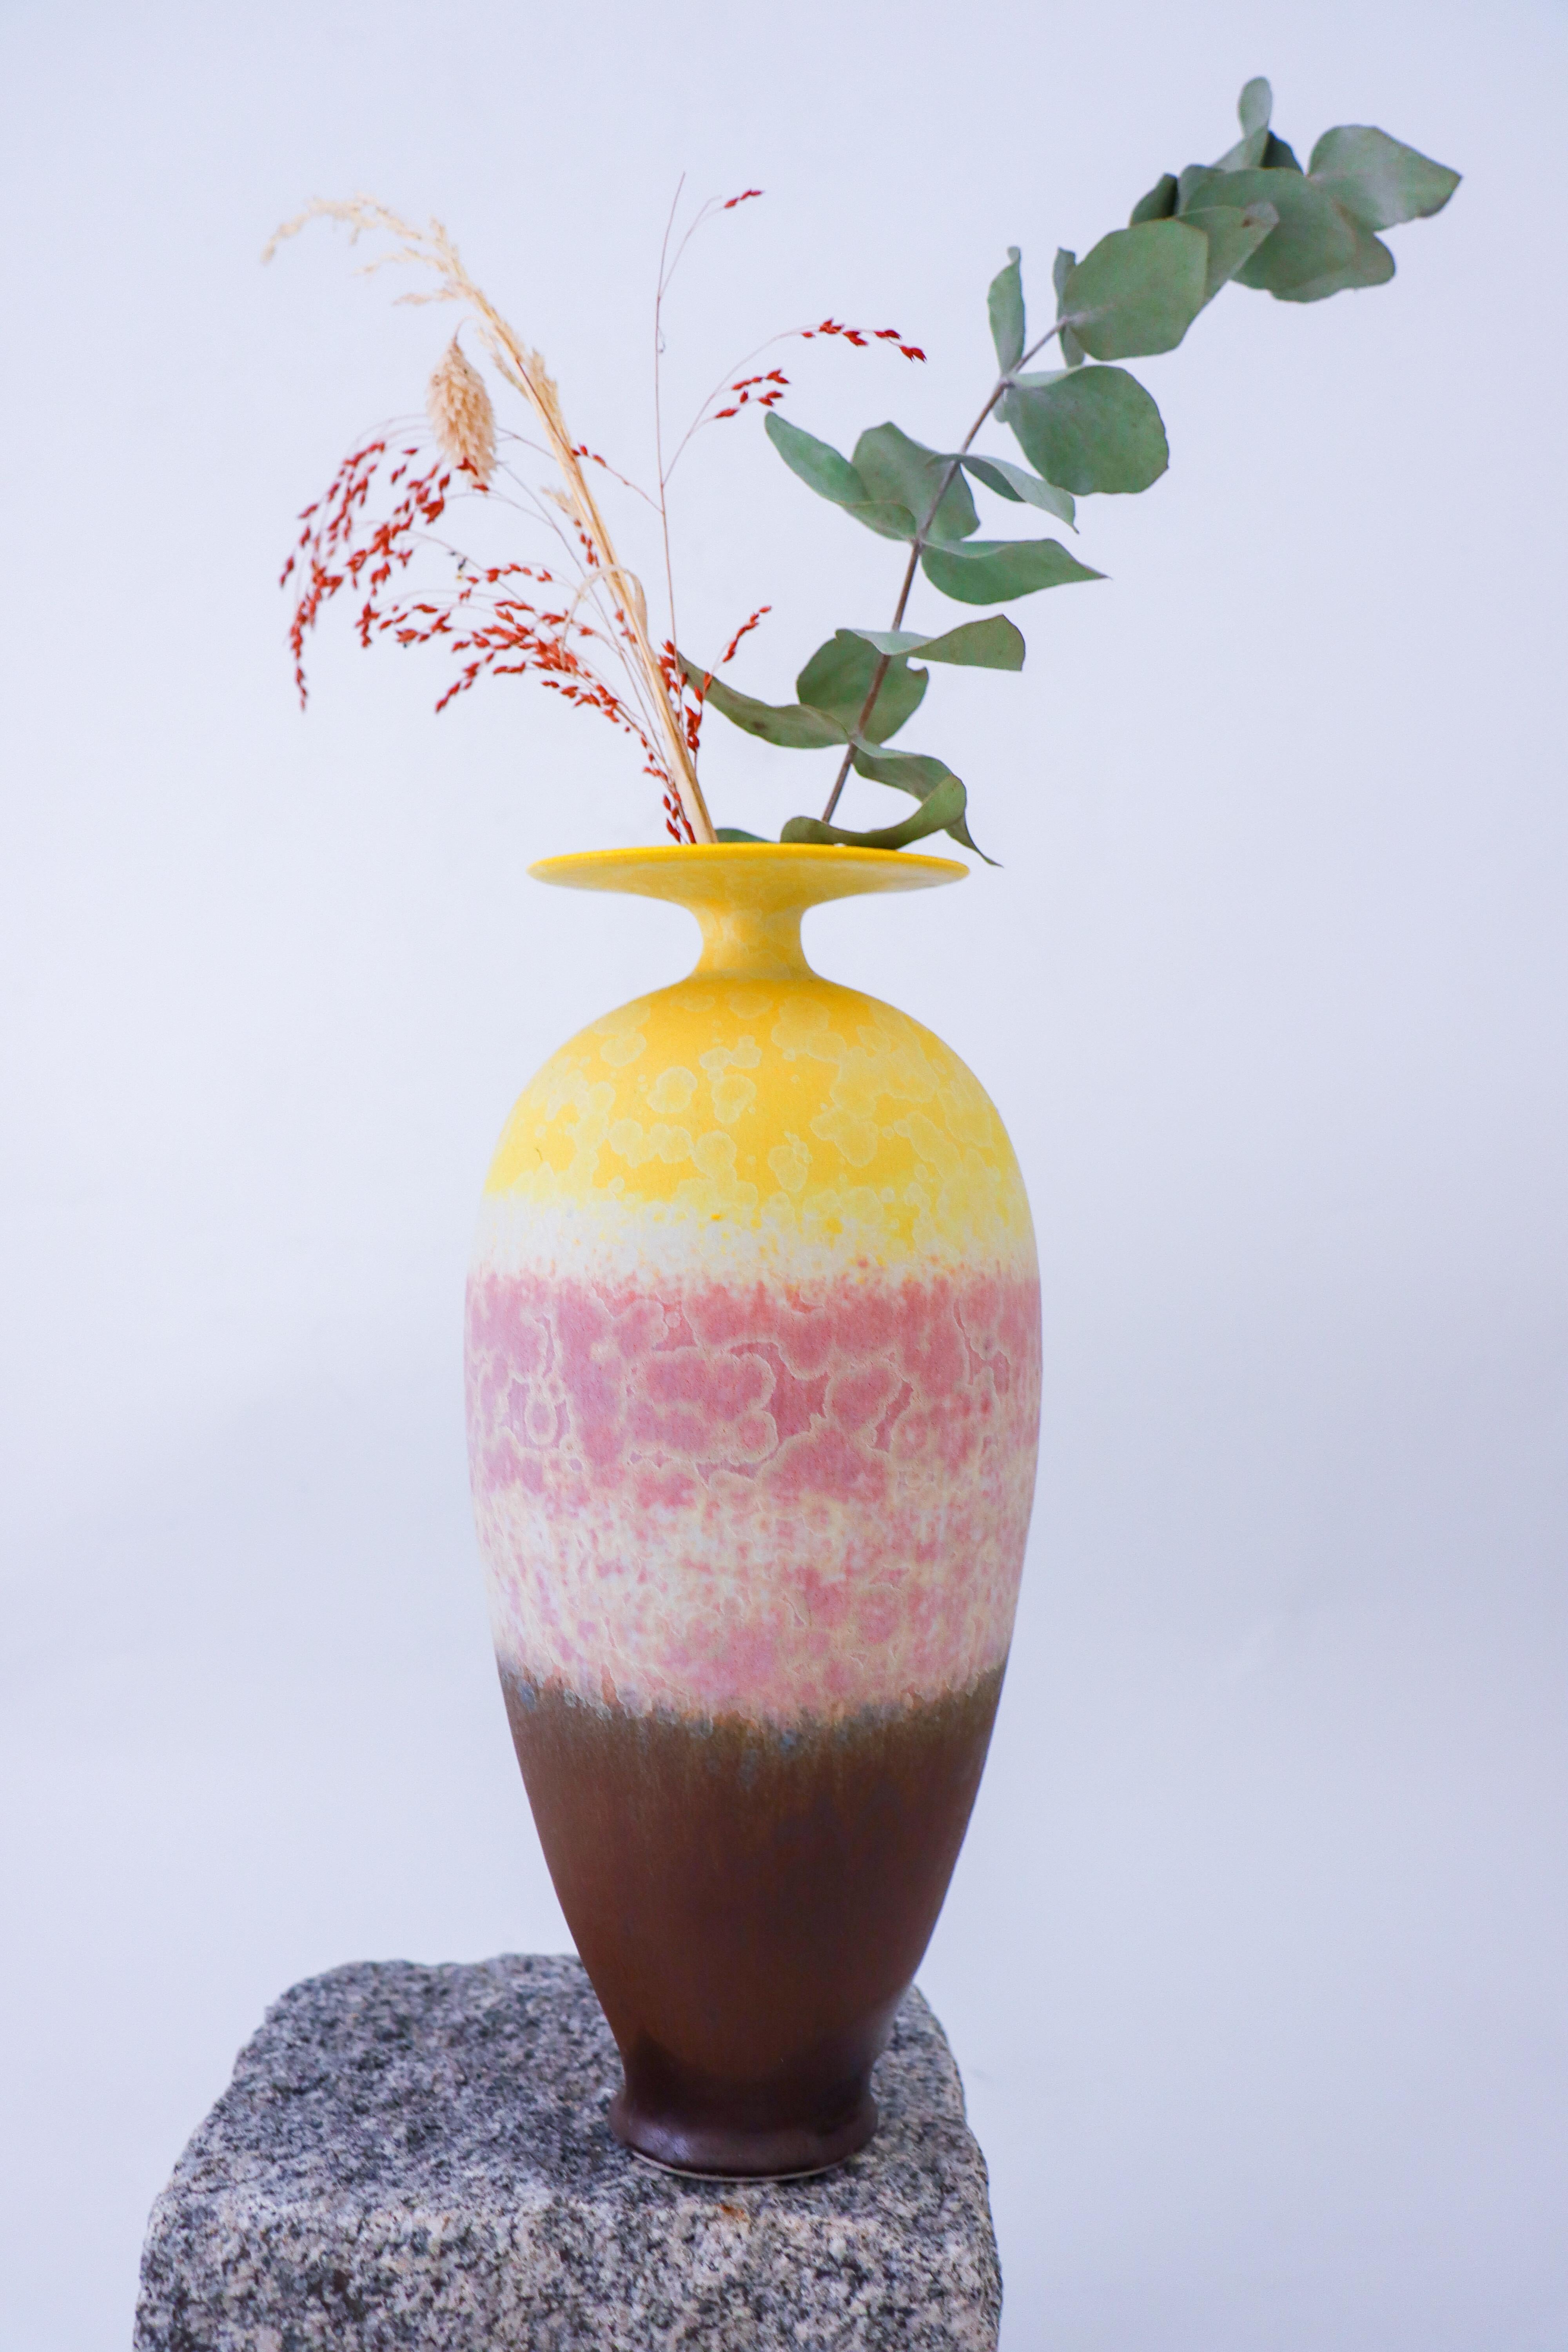 A beautiful vase with a yellow, pink and brown crystalline glaze designed by Isak Isaksson in Sweden. The vase is 28 cm (11.2